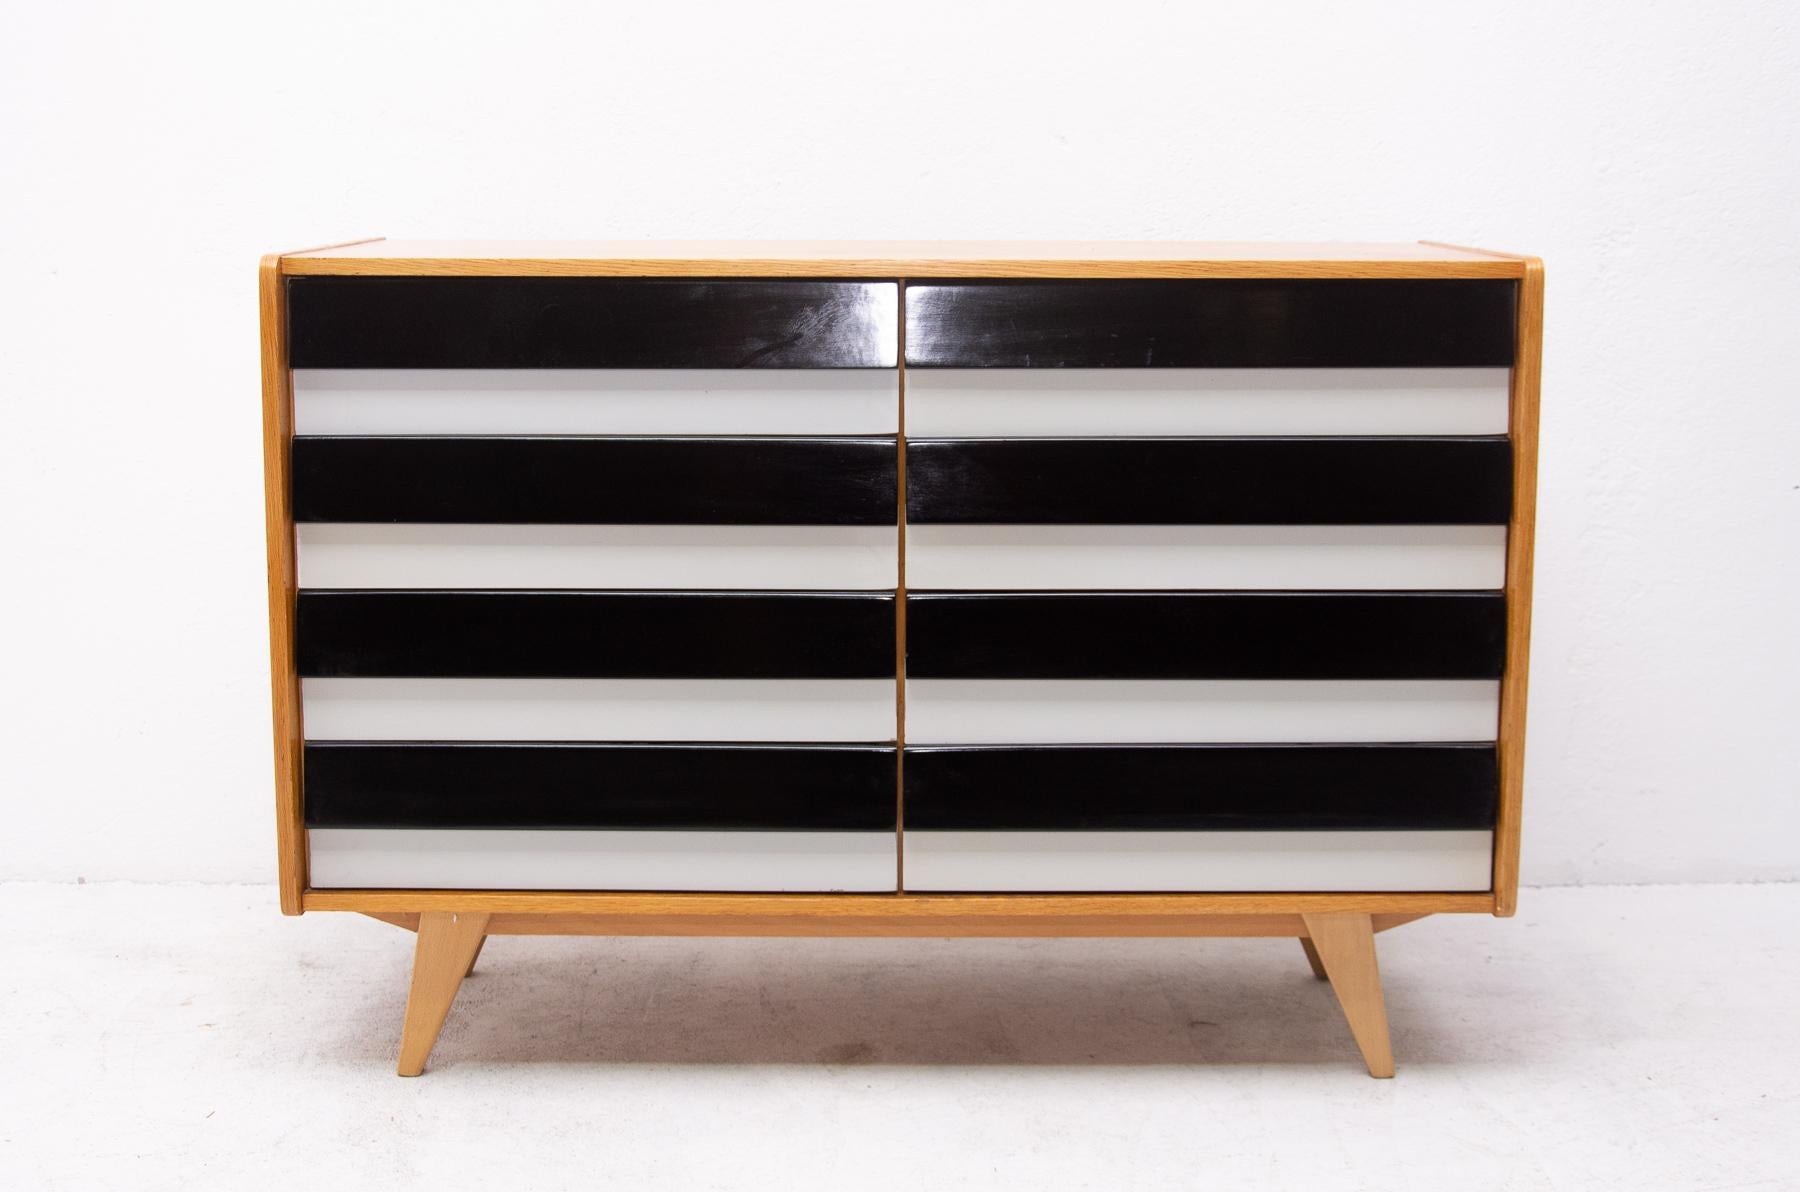 Modernist chest of drawers, model no. U-453, designed by Jirí Jiroutek for Interiér Praha. It was made in the former Czechoslovakia in the 1960´s. This model is associated with the world-famous EXPO 58 in Brussels. It features beech wood, plywood,